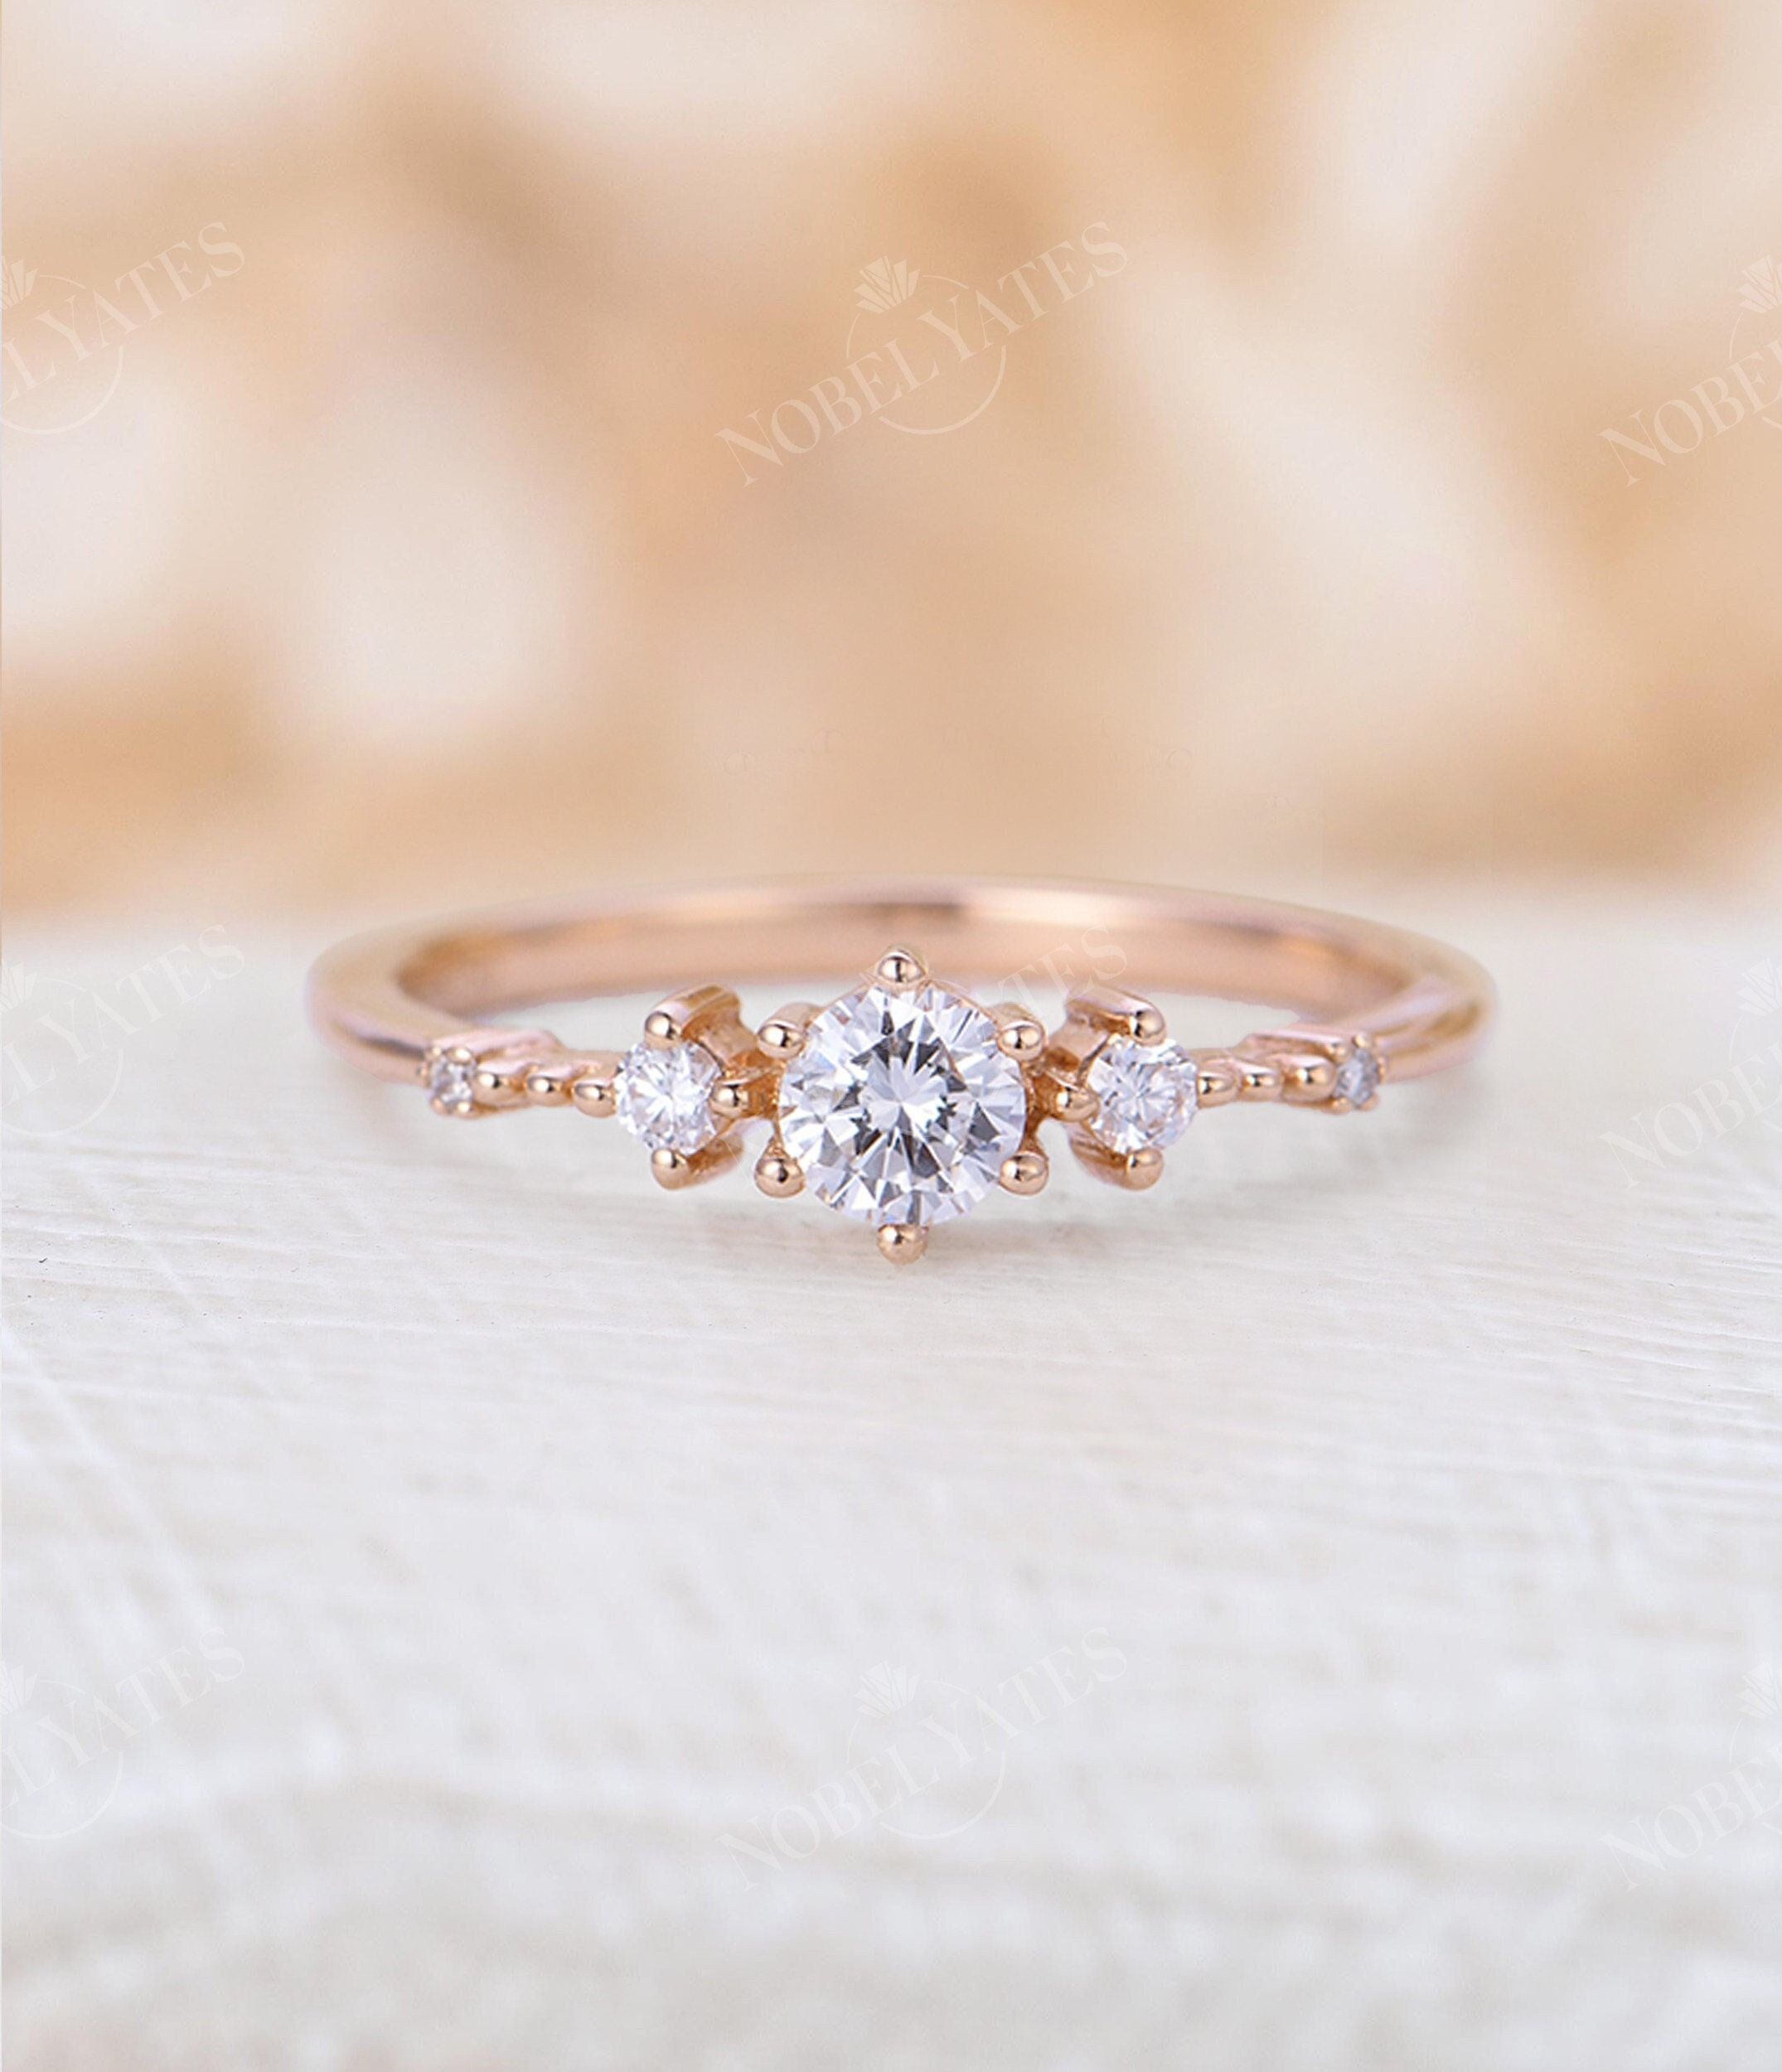 18k Solid Rose Gold Diamond Heart Ring Pave Diamonds Genuine White Diamond  stacking Ring gift for Her - Etsy | Fashion rings, Rings for girls, Cute  promise rings